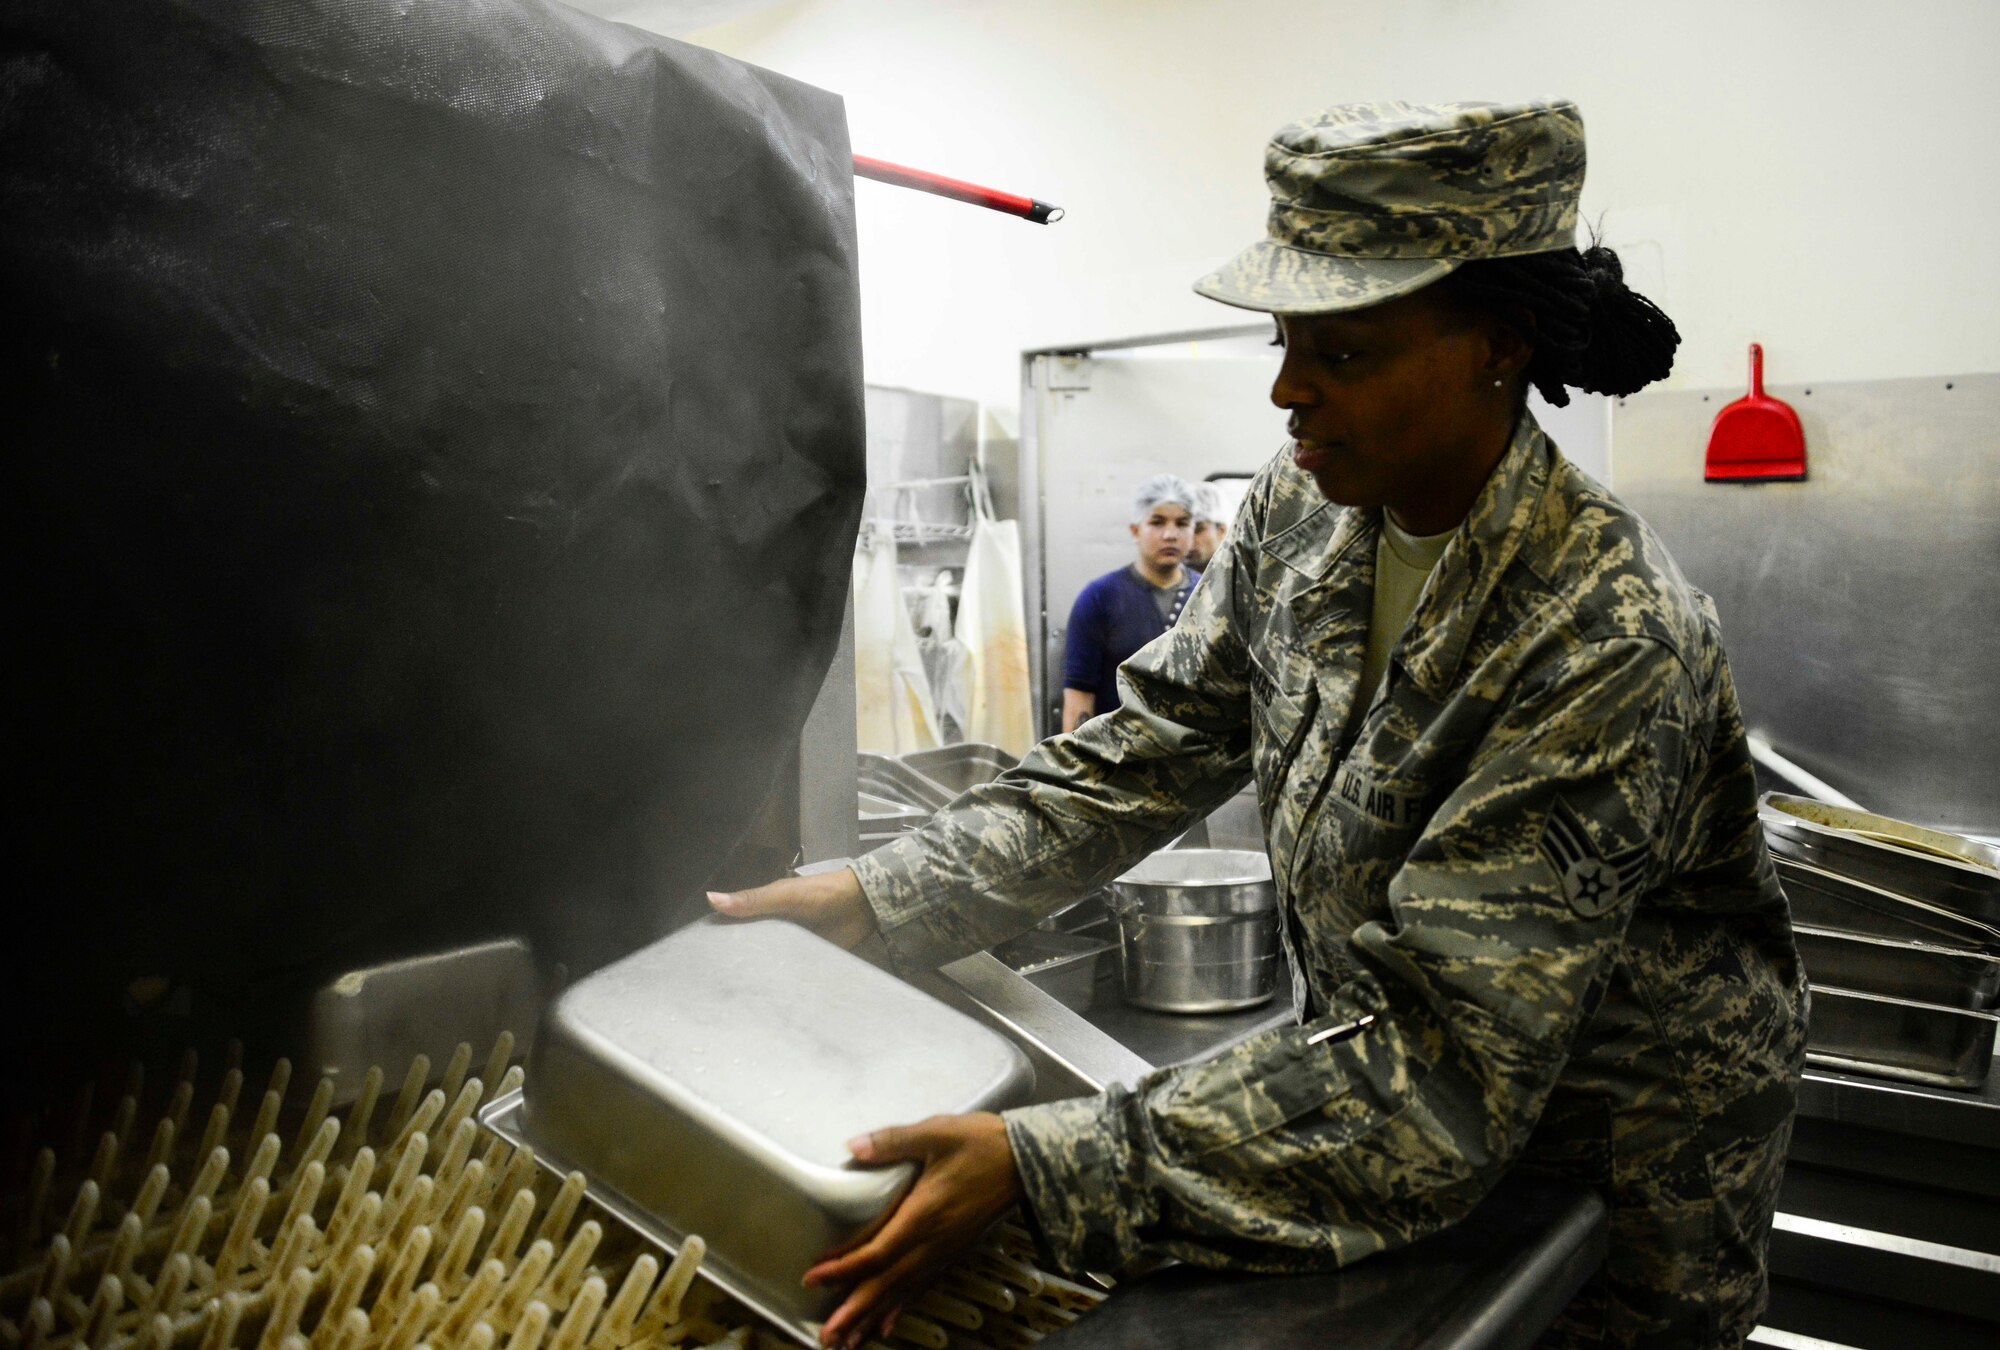 Senior Airman Monae Thomas, 379th Expeditionary Force Support Squadron service journeyman, puts a pan through the pot wash to test the temperature of the water as part of the unit’s weekly internal public health inspection at the Independence Dining Facility Sept. 20, 2016, at Al Udeid Air Base, Qatar. There are three main dining facilities here: the Independence, Manhattan and the Blatchford-Preston DFACs. Service journeymen in the Independence DFAC provide quality meals to about 5,000 members in a 24-hour period. (U.S. Air Force photo/Senior Airman Janelle Patiño/Released) 